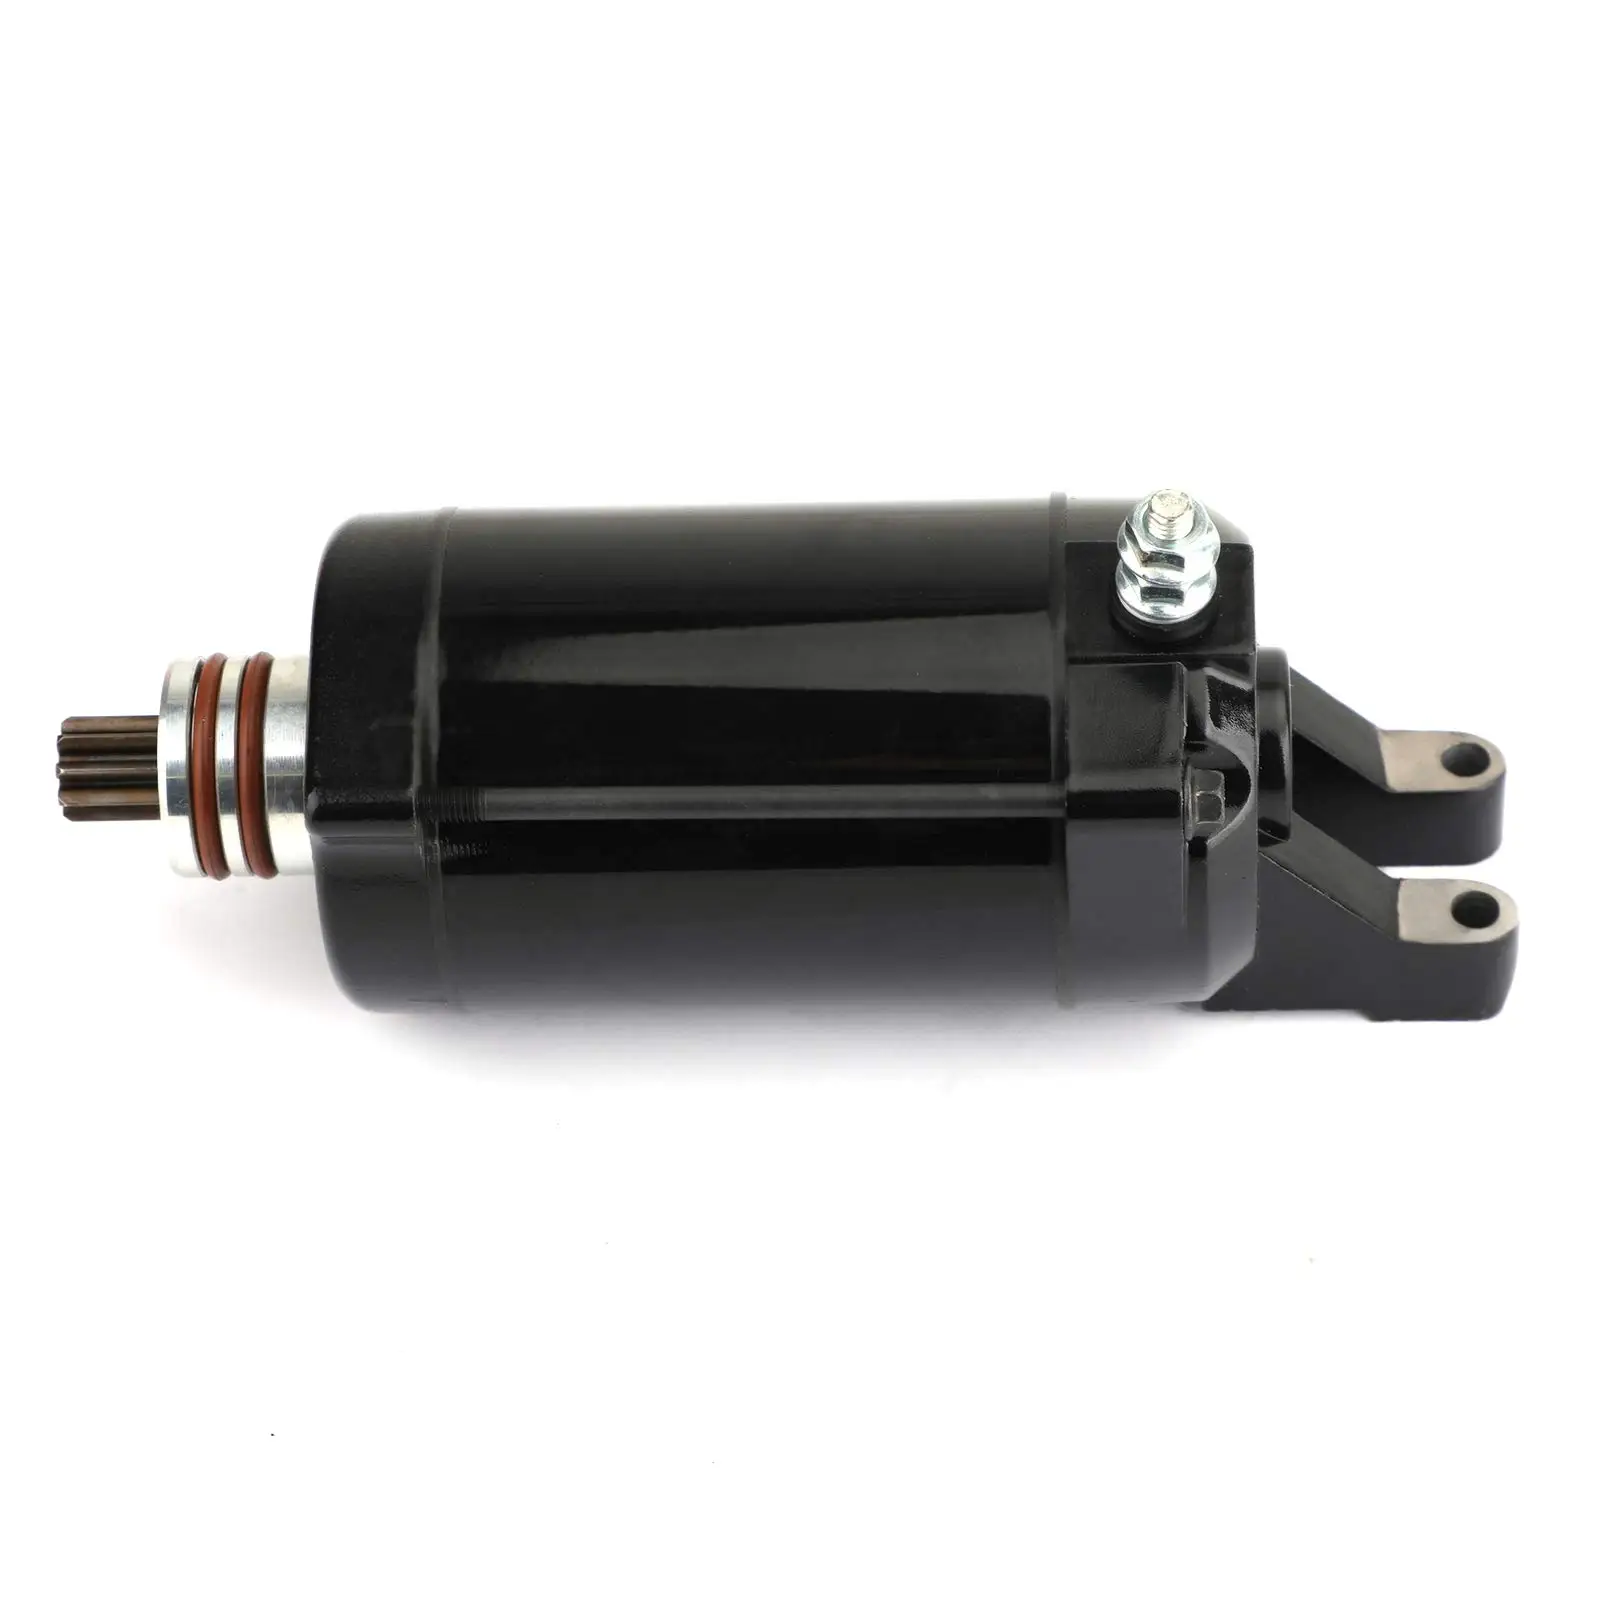 Starter Motor for SeaDoo Spark 2 Up / 3 Up 900 Rotax 2014-2019 ACE 14-19 420893830 420892426 enlarge